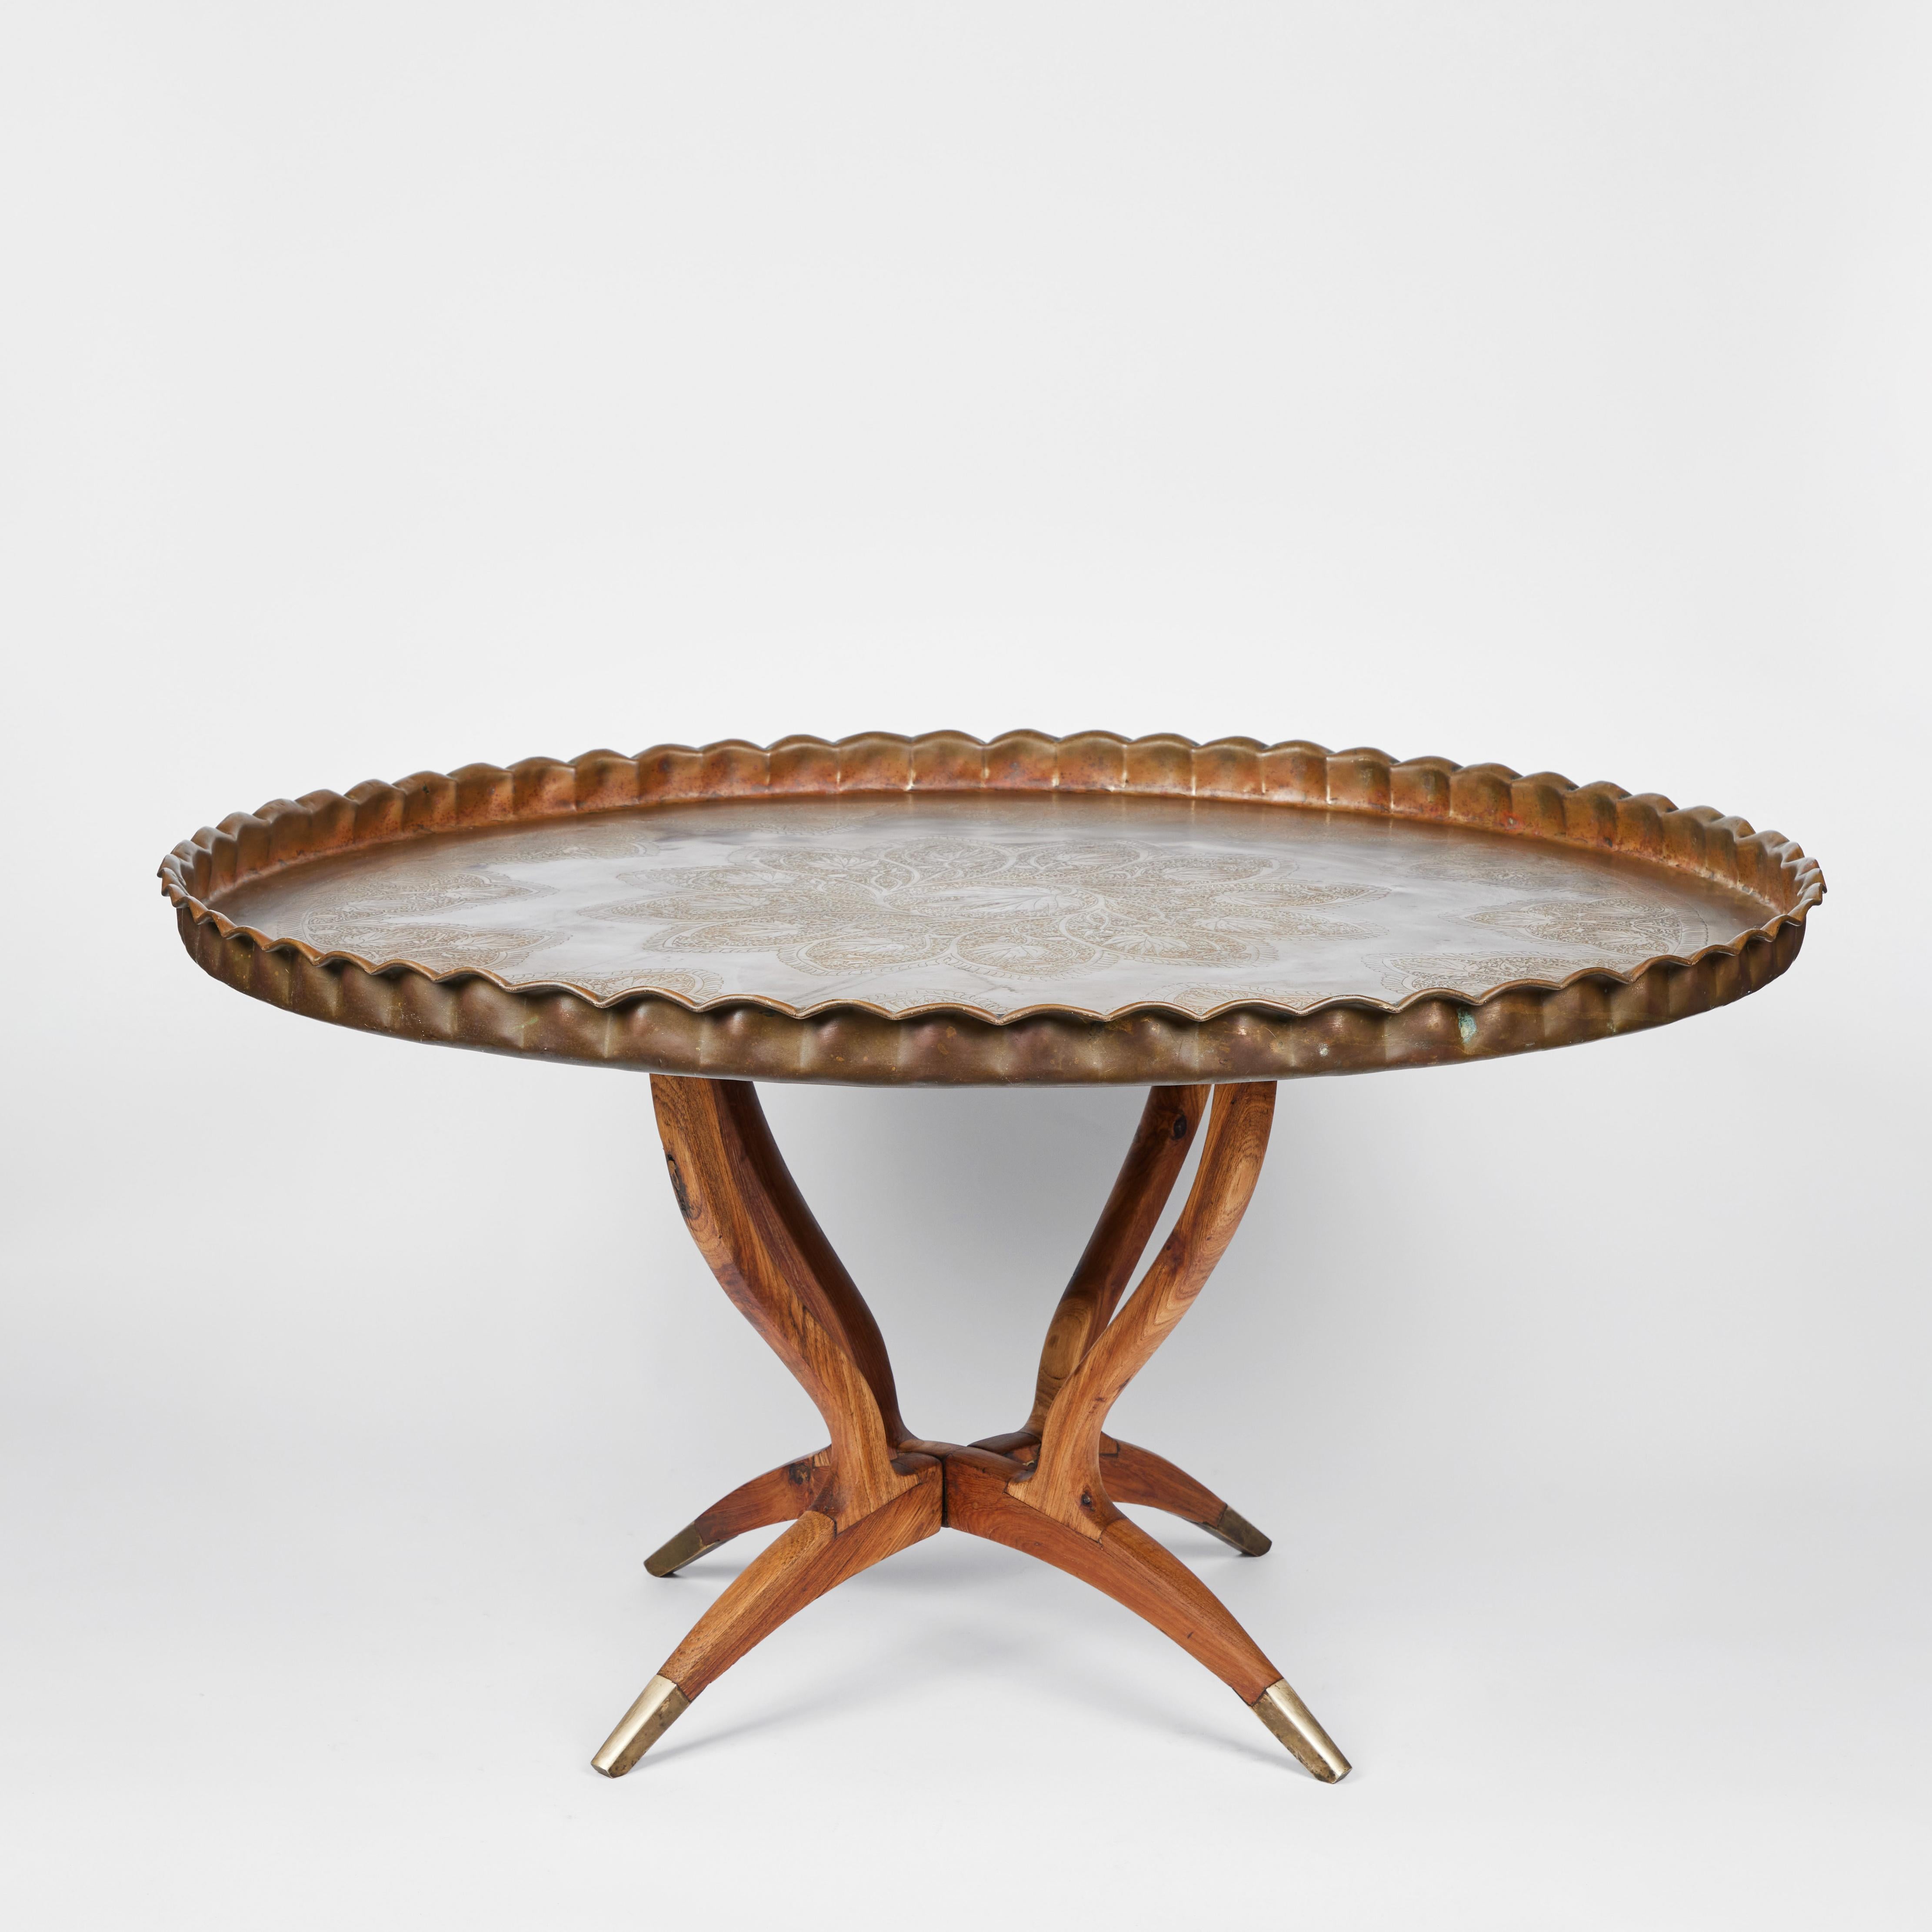 This impressive round extra large mid century brass Moroccan tray table has a lovely scalloped edge and an intricate ornamental all over design pattern on the top surface. It sits upon a rich grained folding wood base with brass feet detail on each